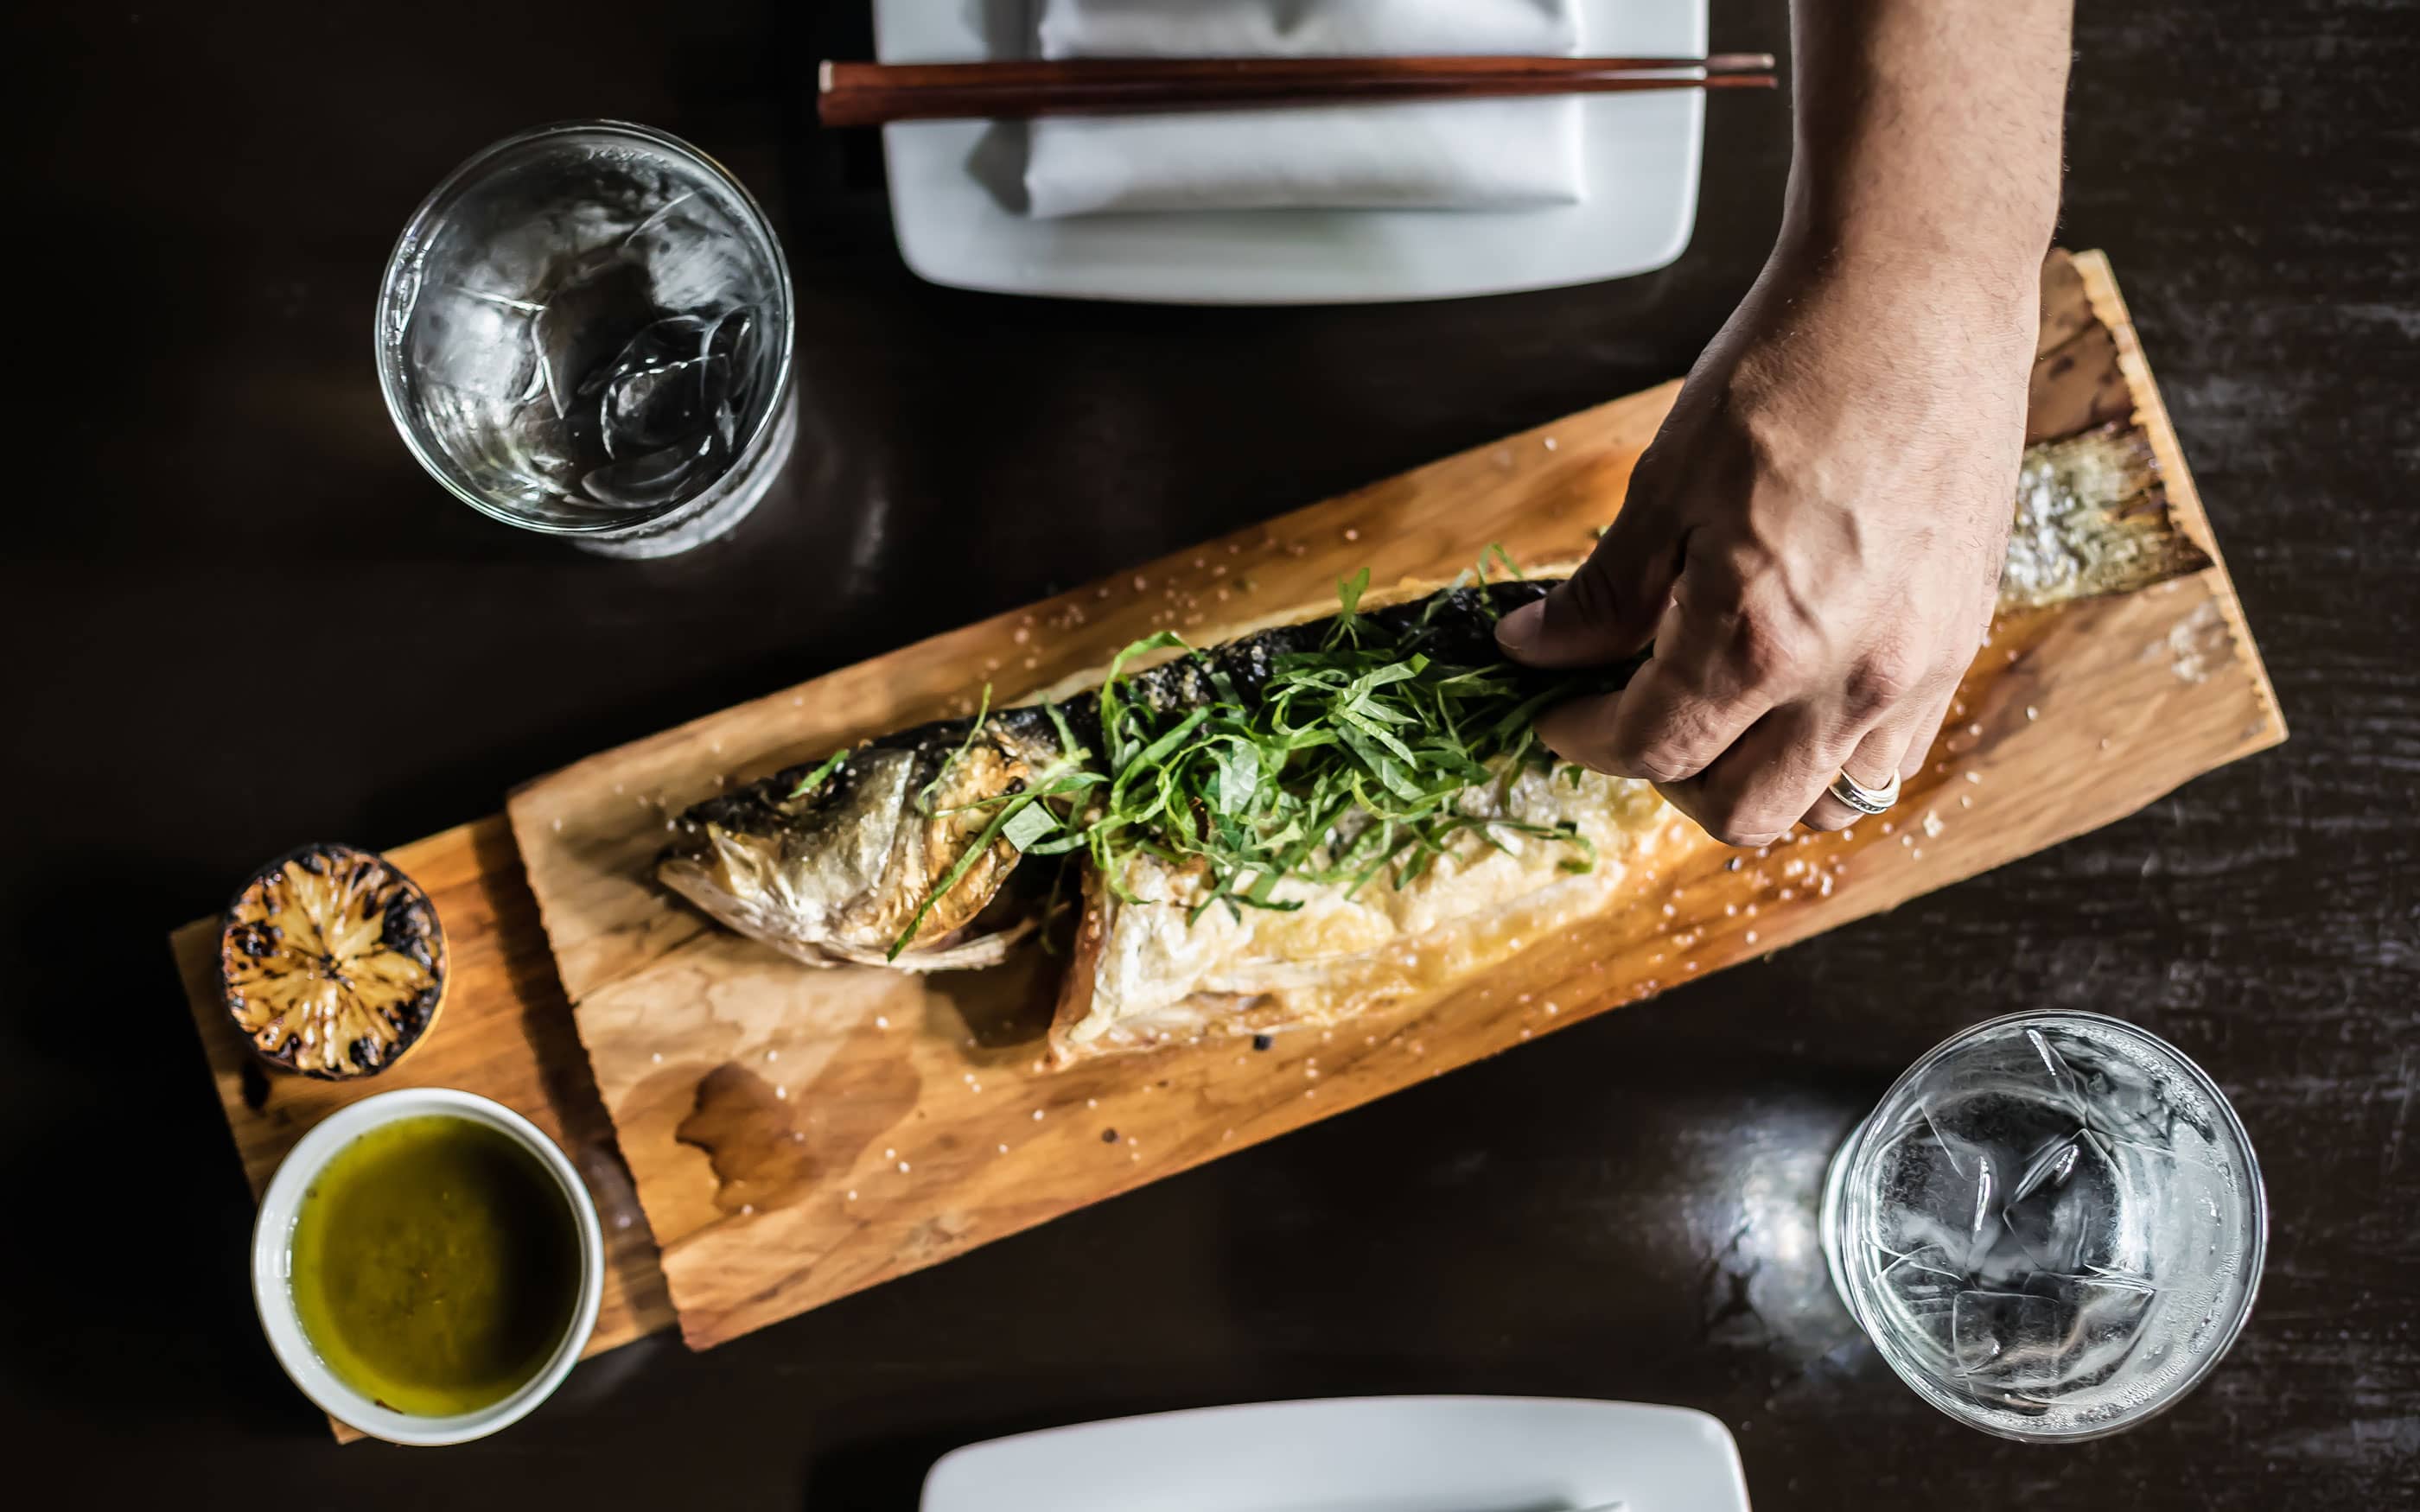 Table view from above of hand garnishing fish with green onions served on wood board